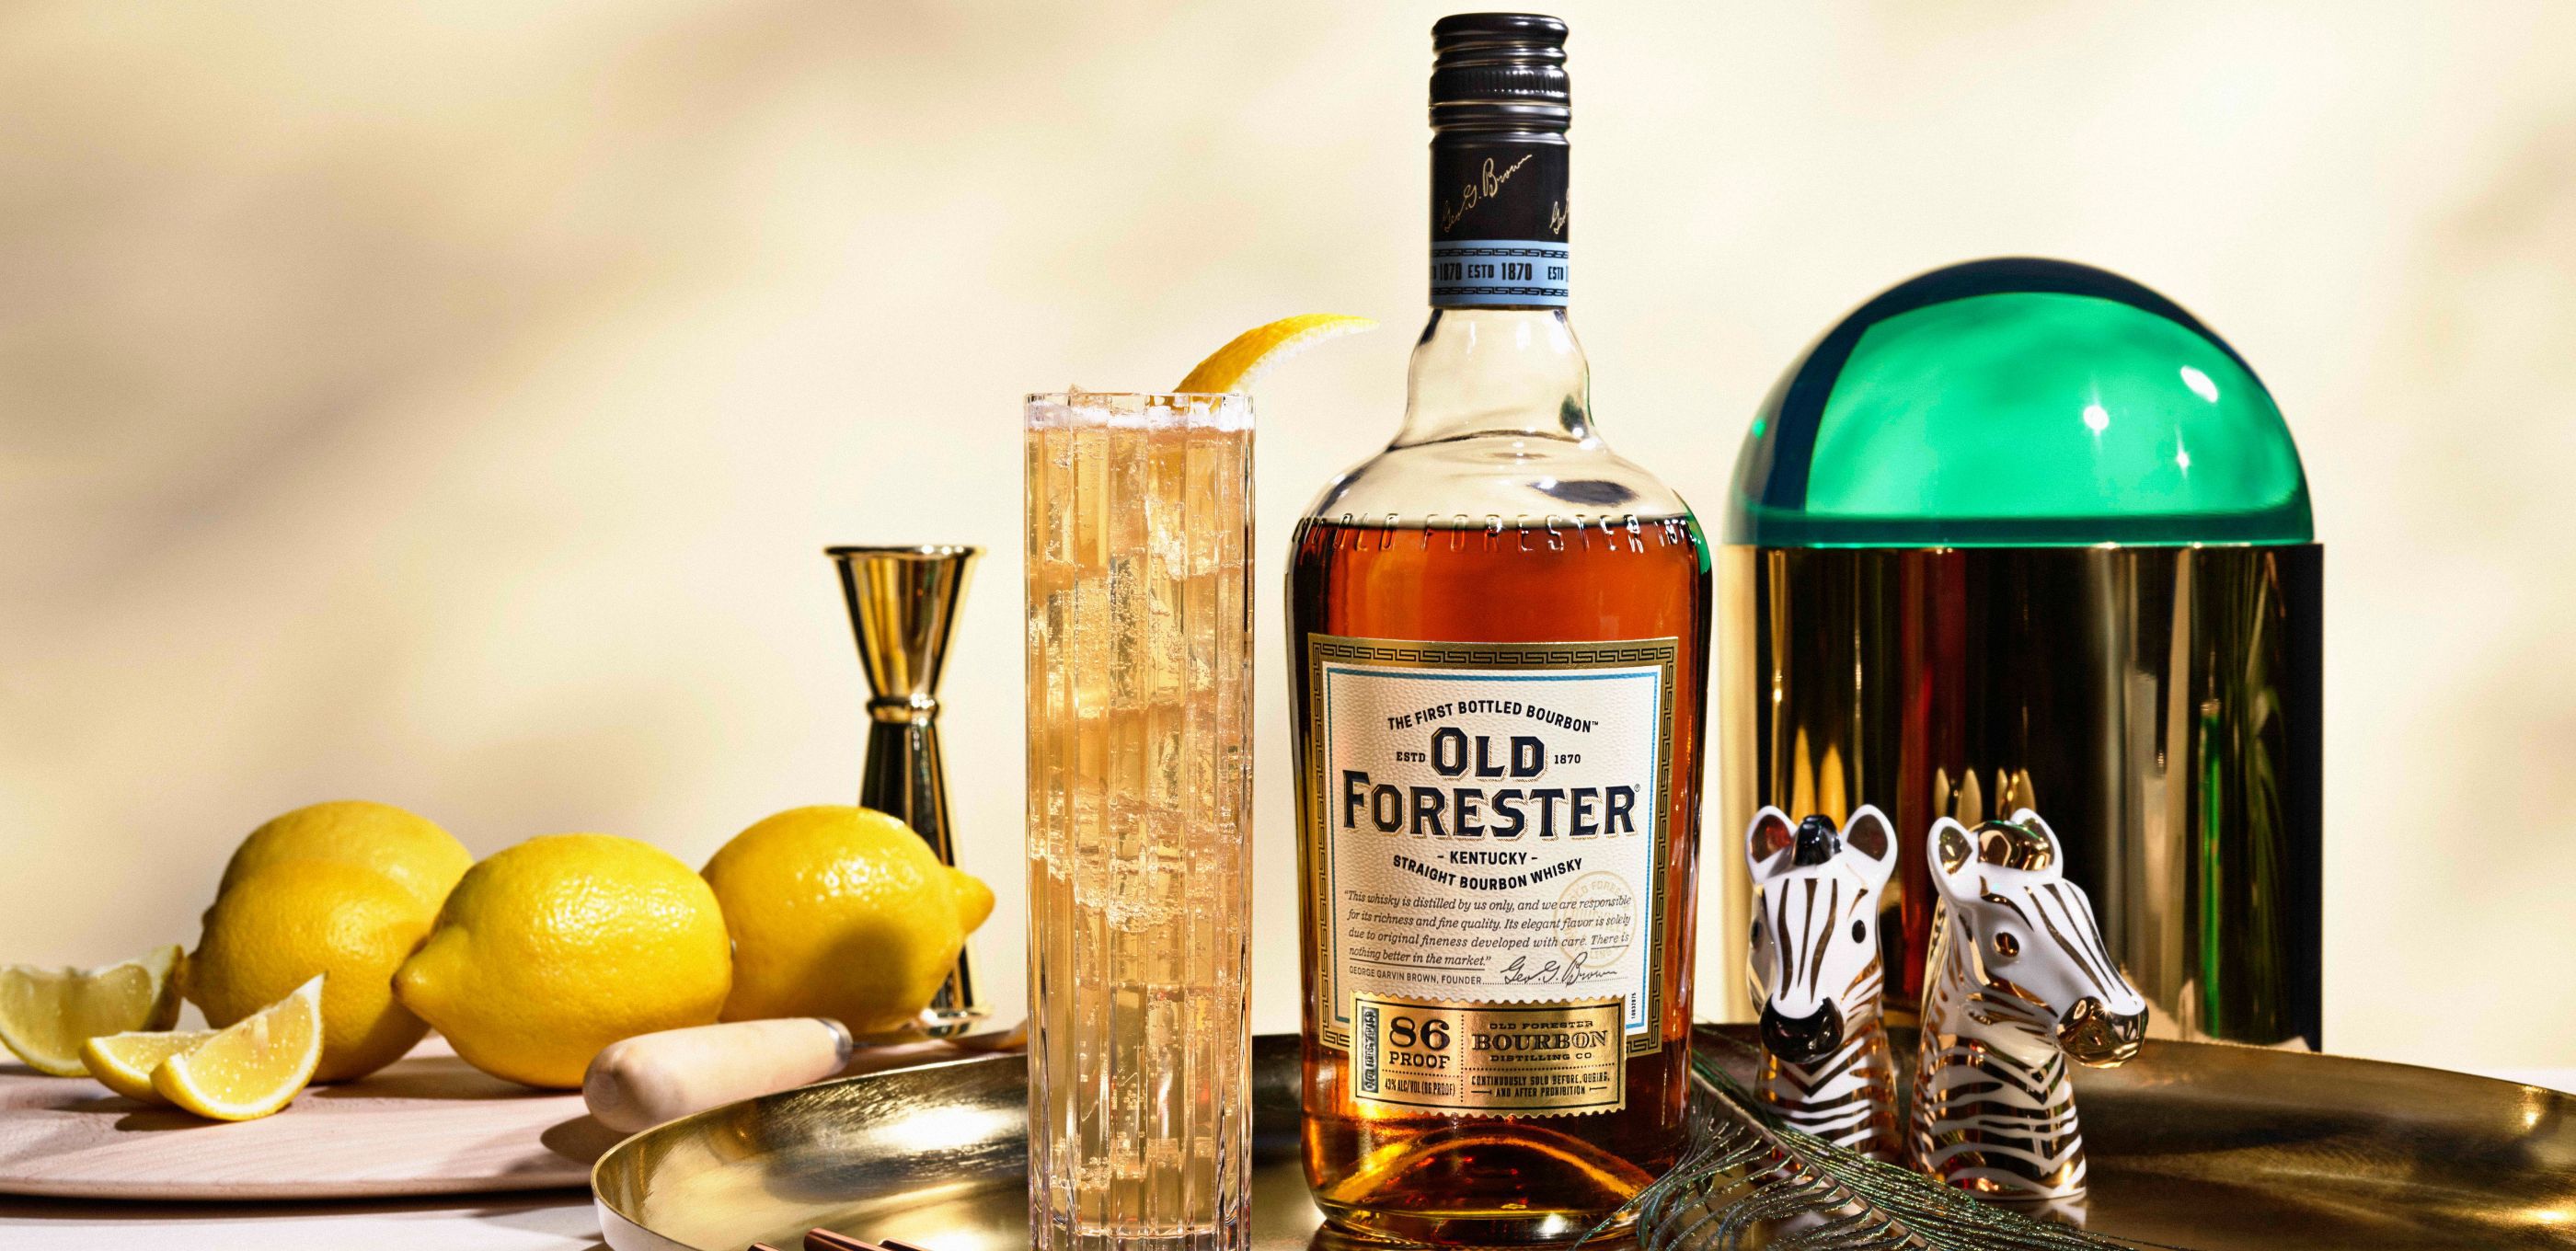 A bottle of Old Forester with a cocktail